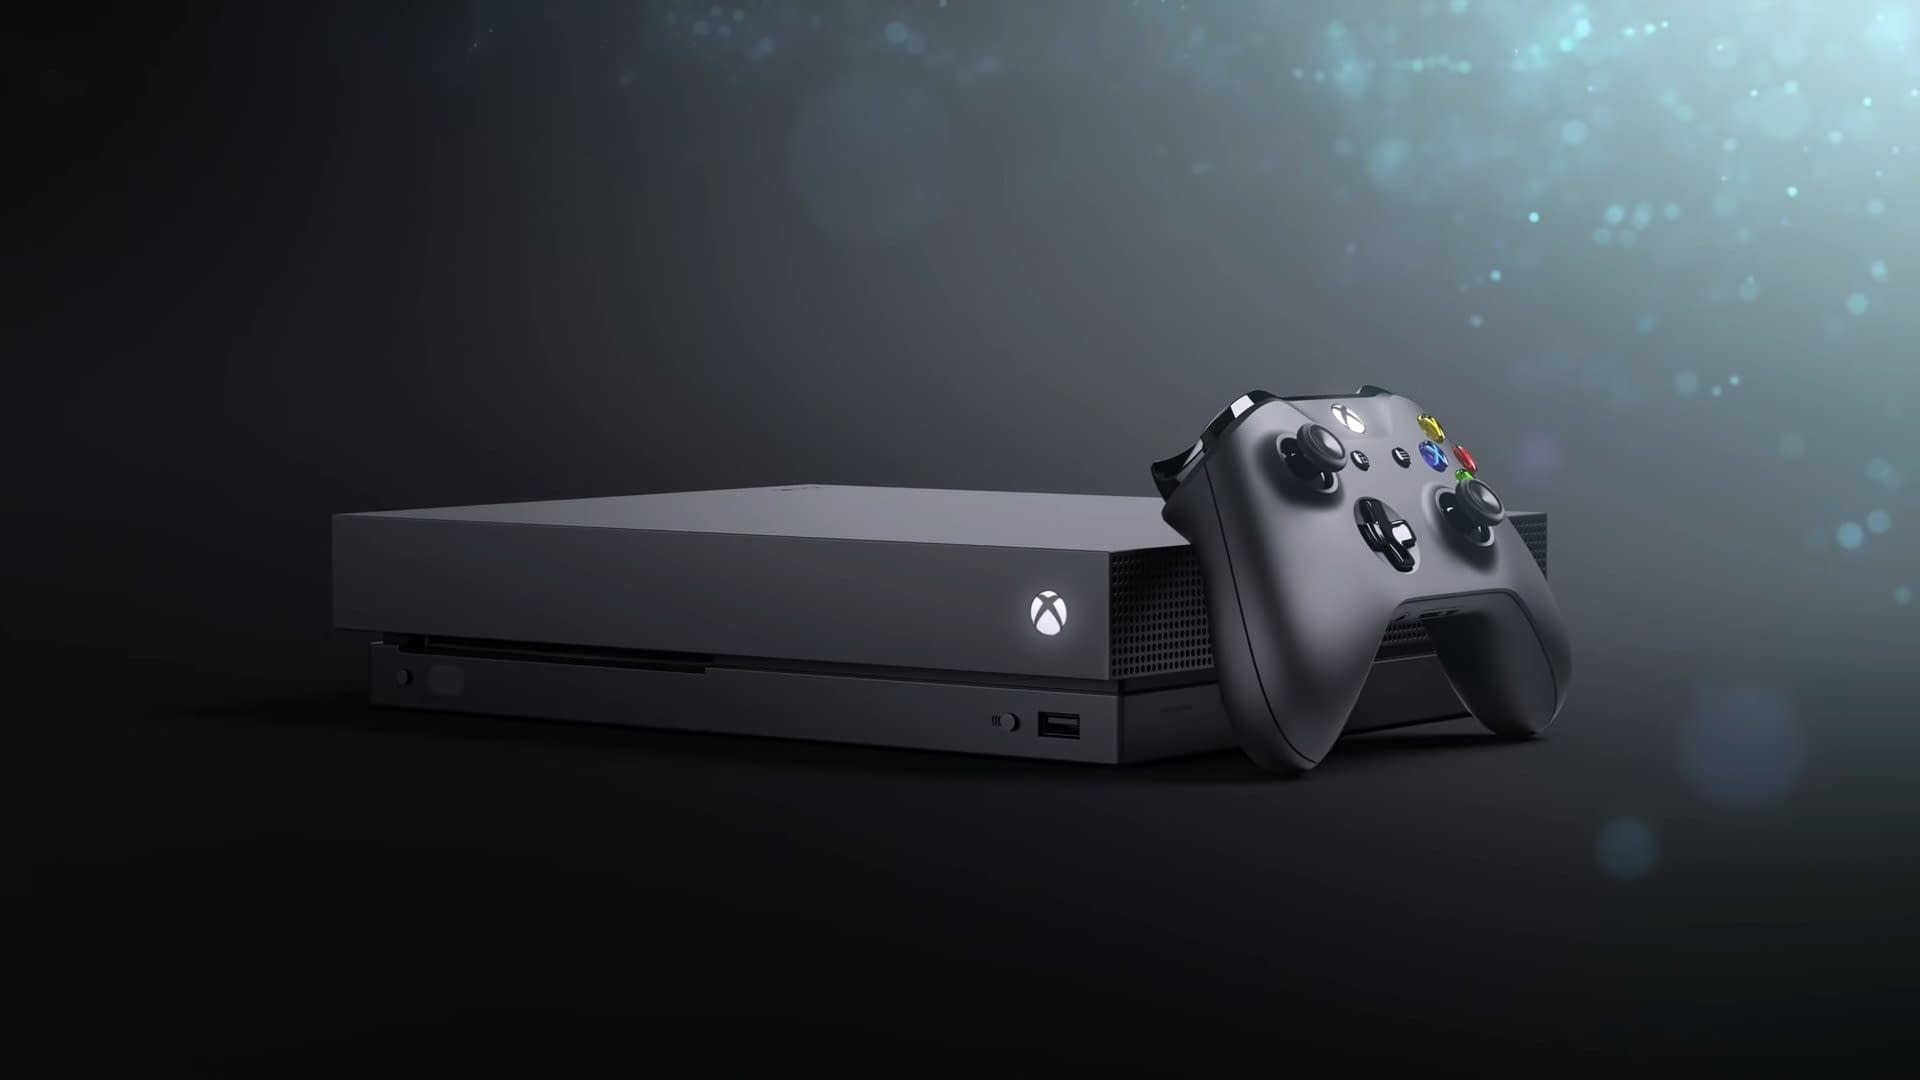 Deciding for Xbox One from Microsoft: Now the Game will not be developed